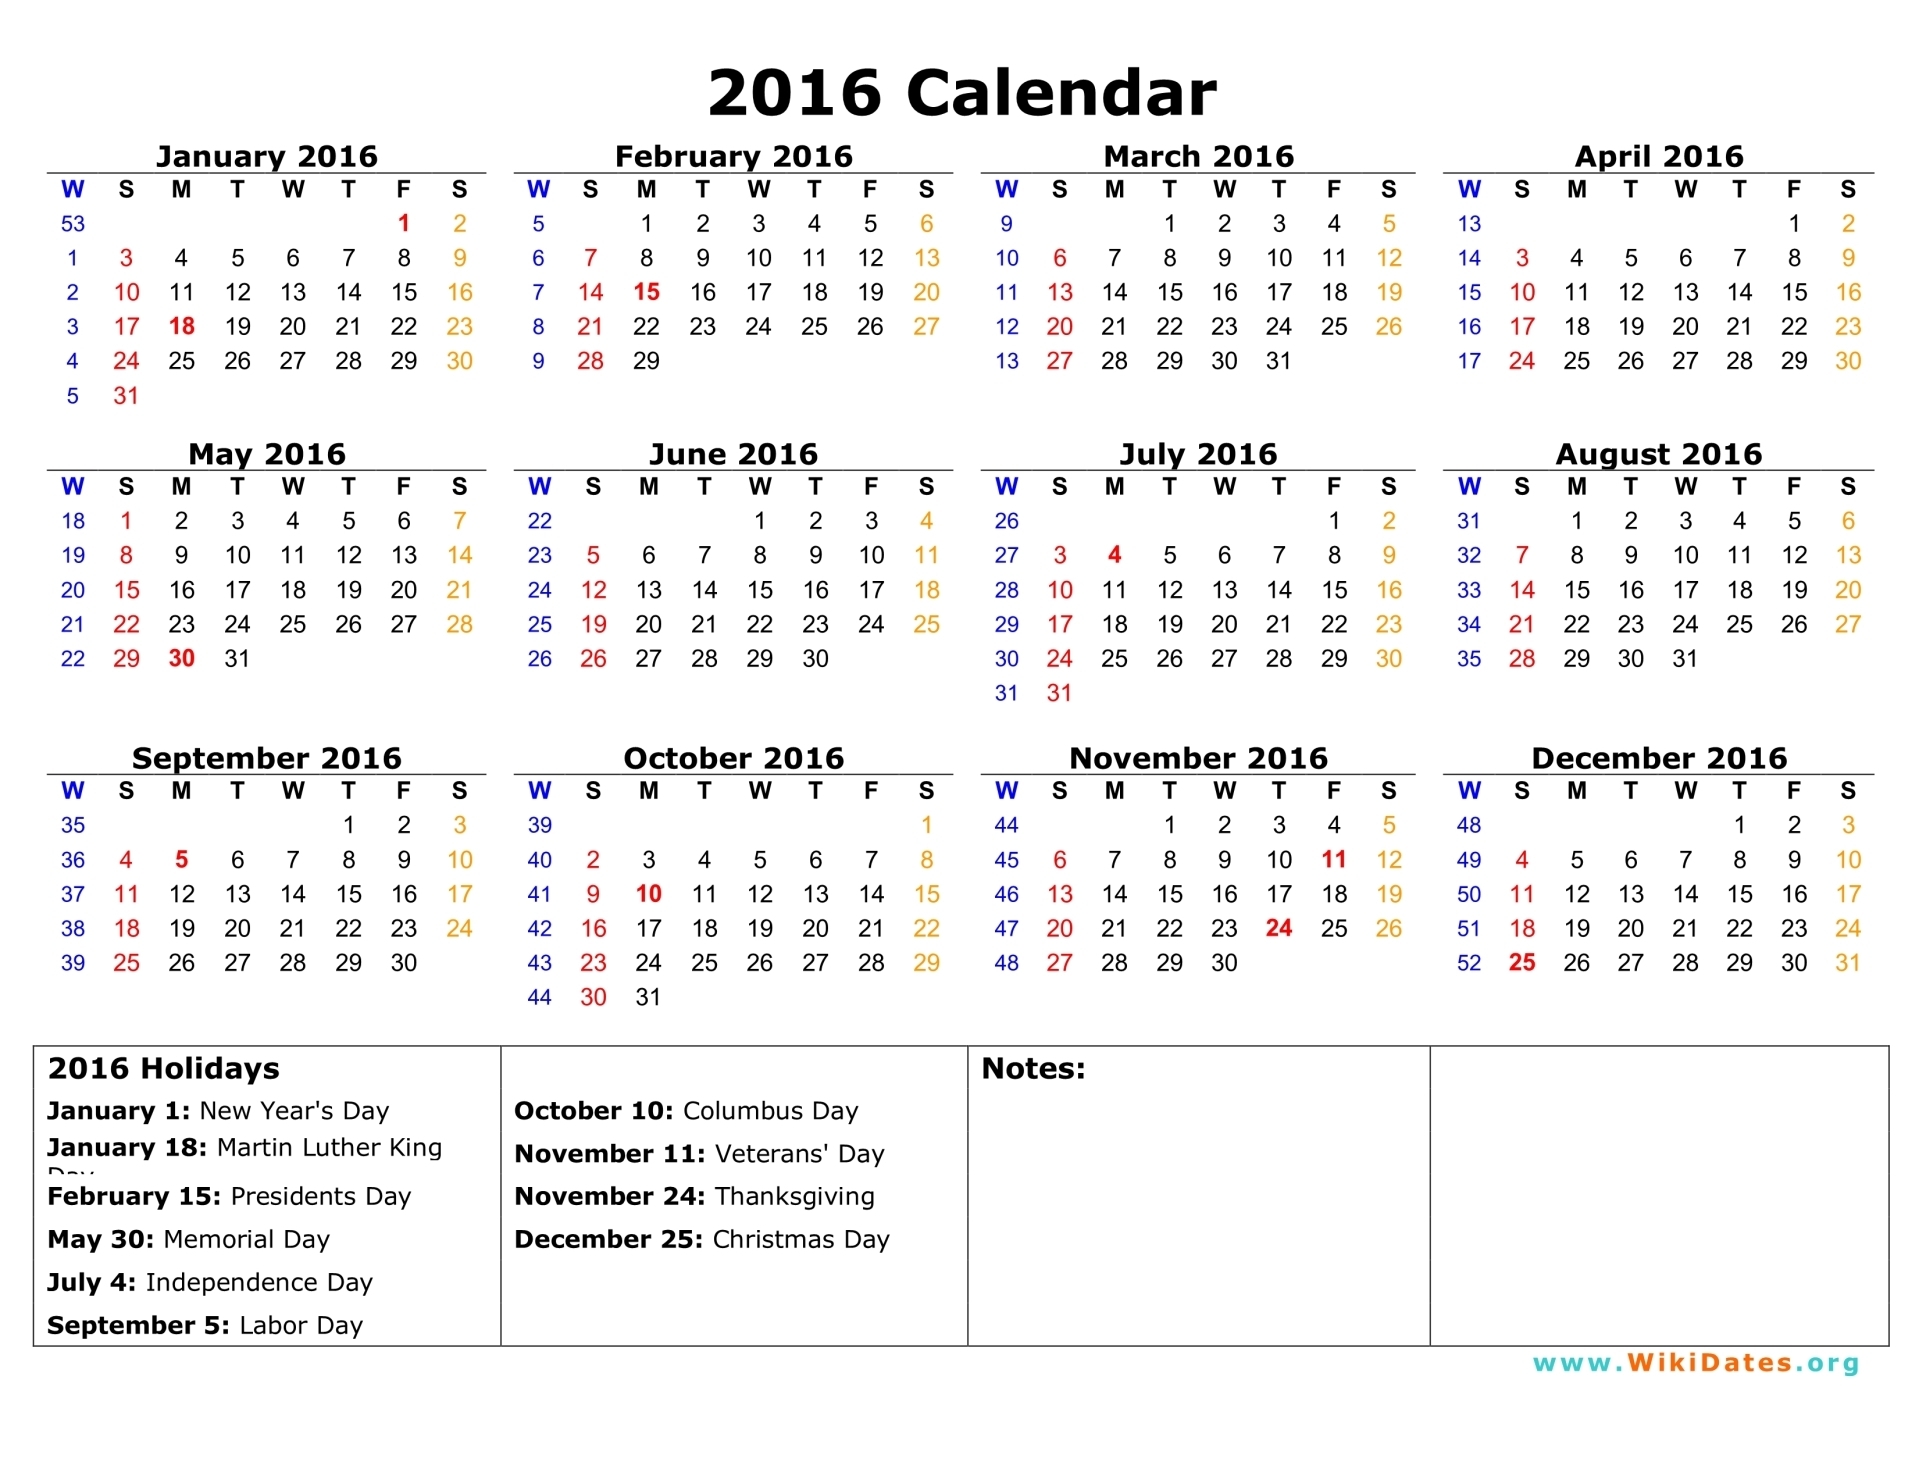 2016 Calendar Template With Holidays from www.wikidates.org